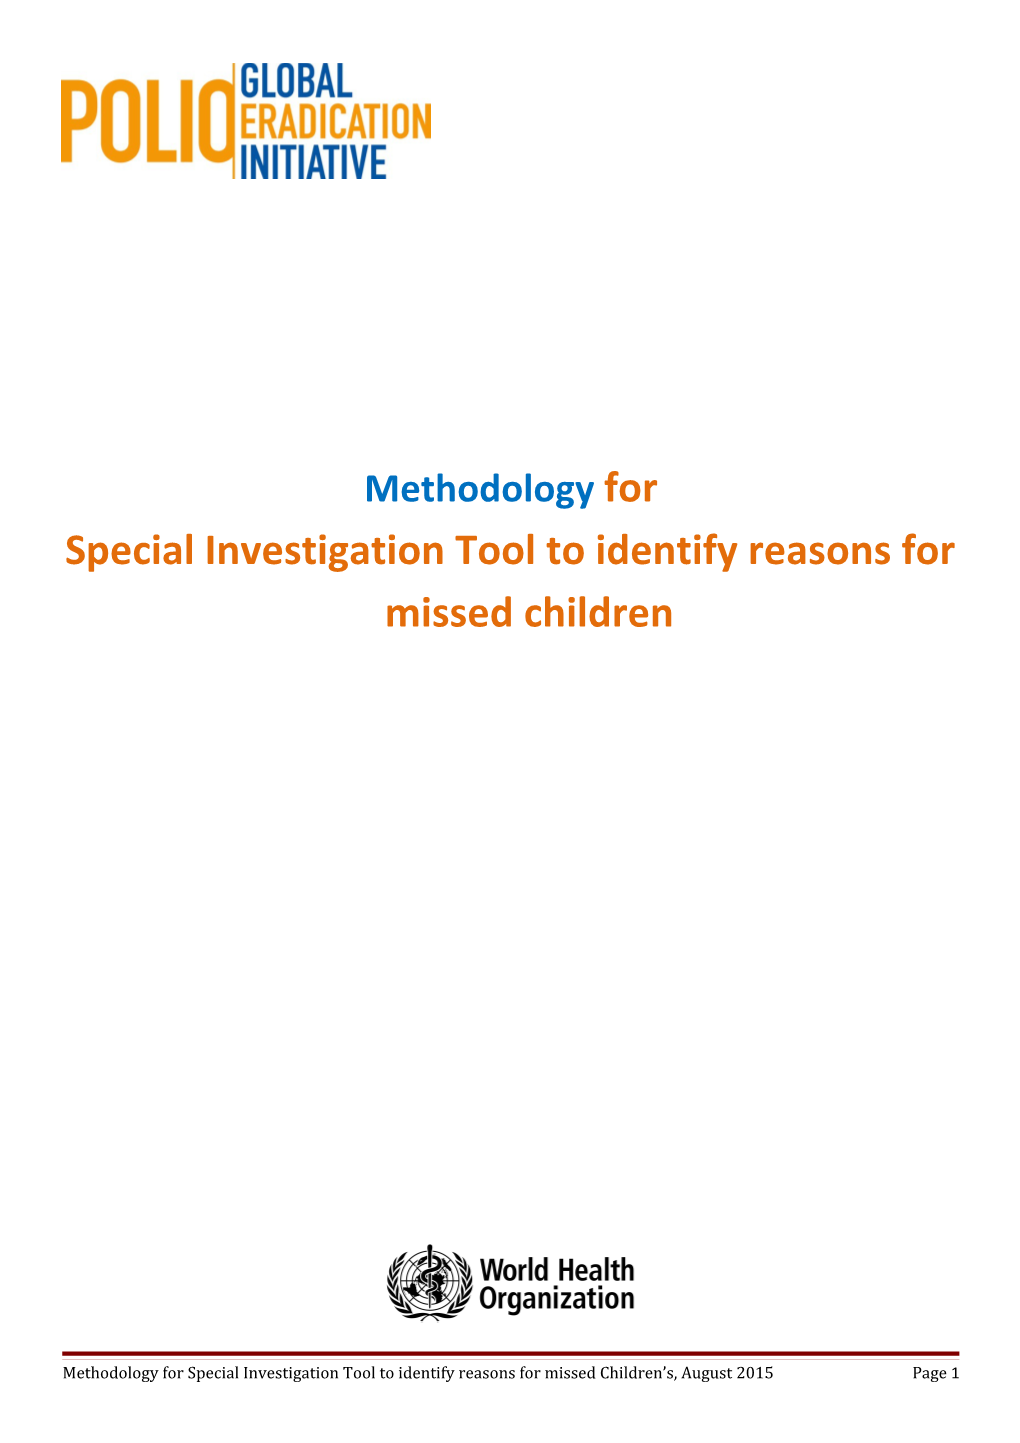 Special Investigation Tool to Identify Reasons for Missed Children